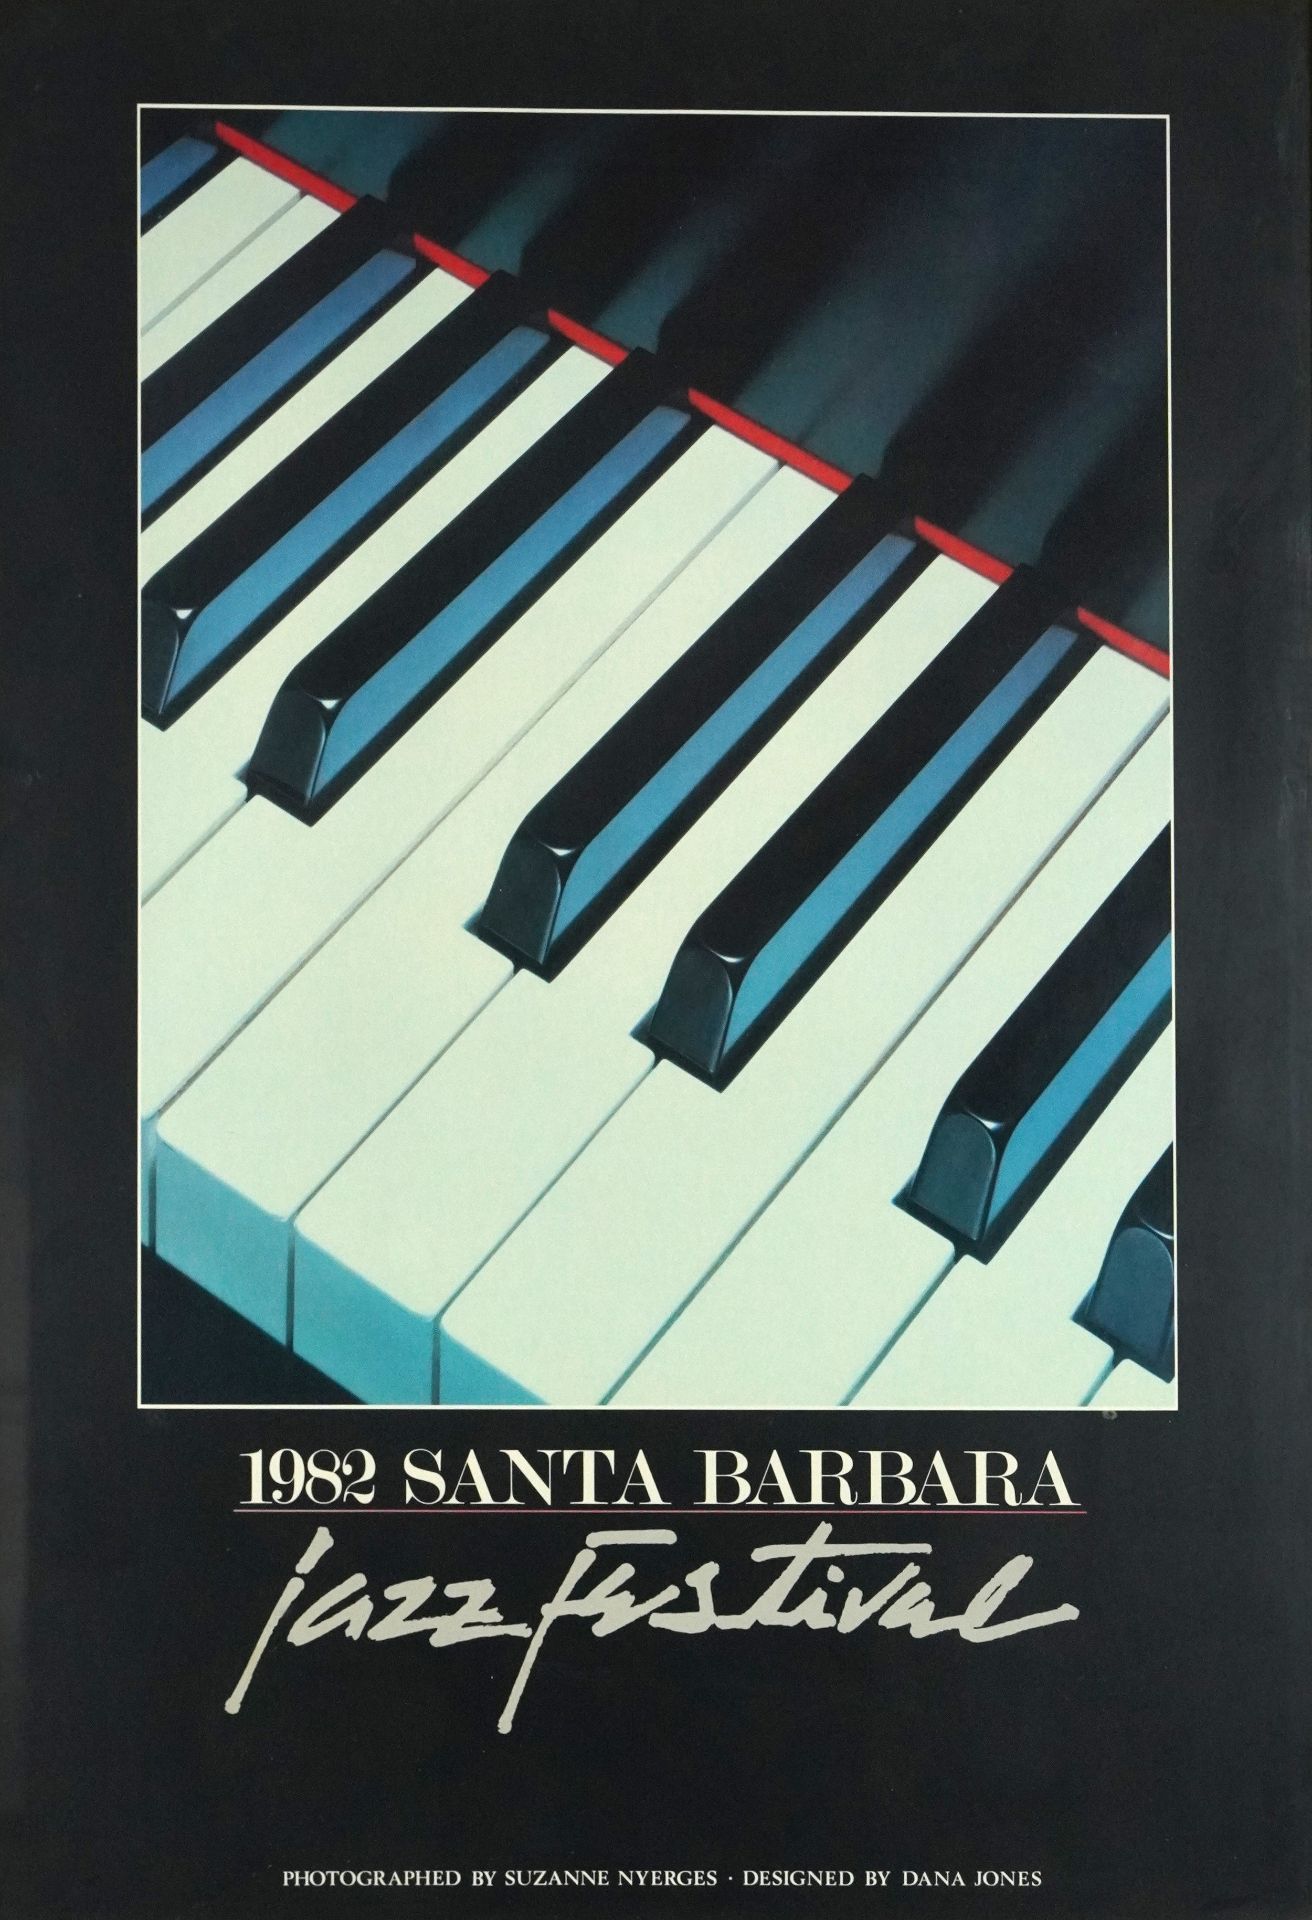 1982 Santa Barbara Jazz Festival poster photographed by Suzanne Nyerges, Designed by Dana Jones,